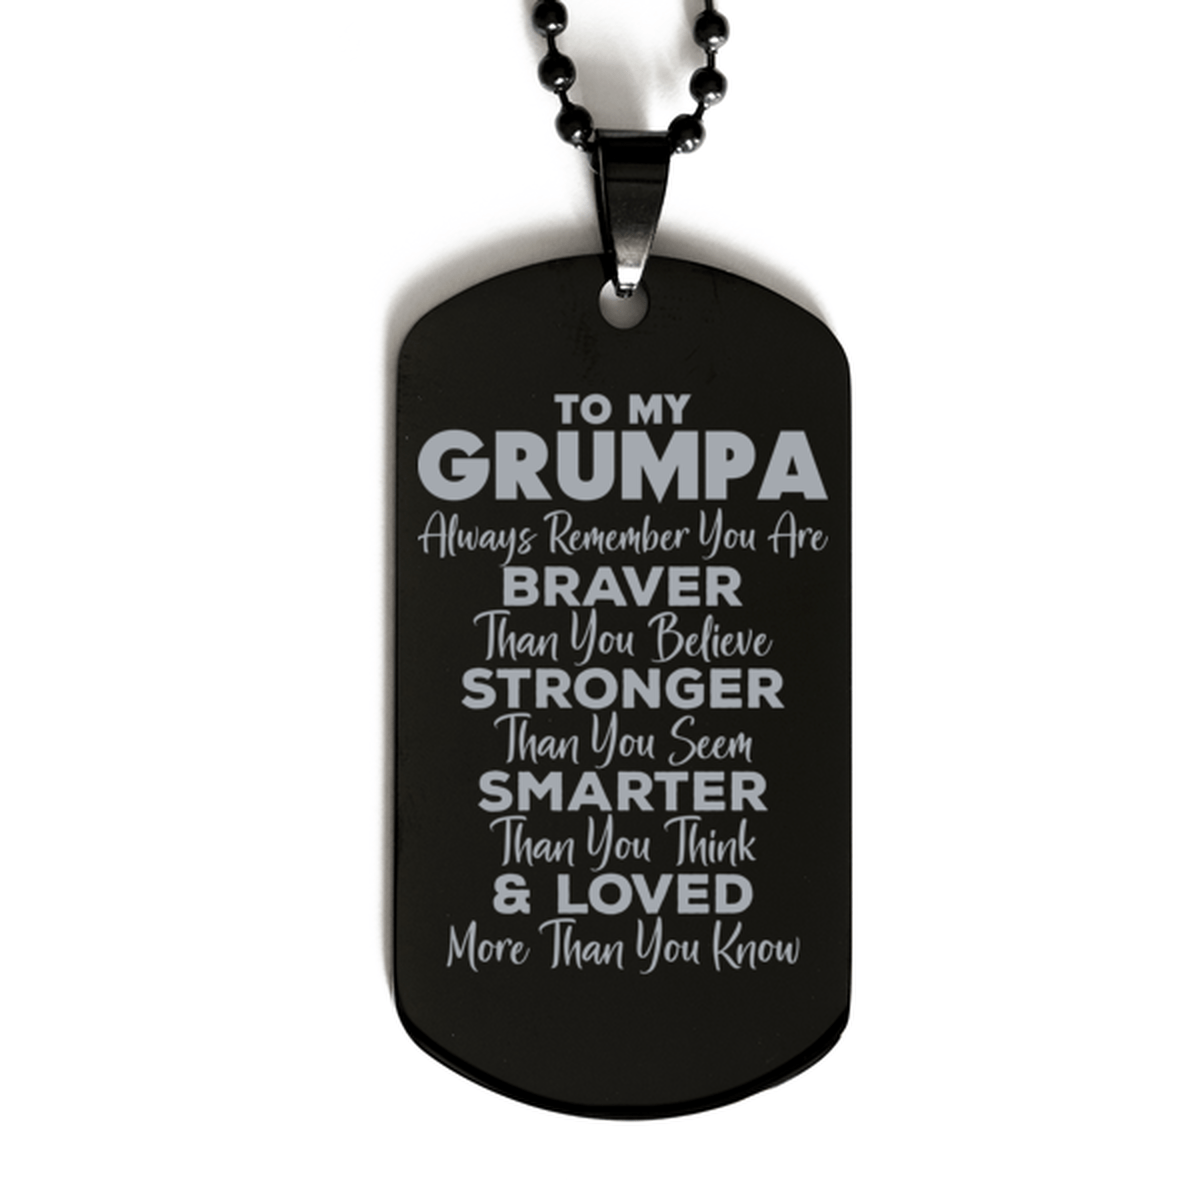 Motivational Grumpa Black Dog Tag Necklace, Grumpa Always Remember You Are Braver Than You Believe, Best Birthday Gifts for Grumpa